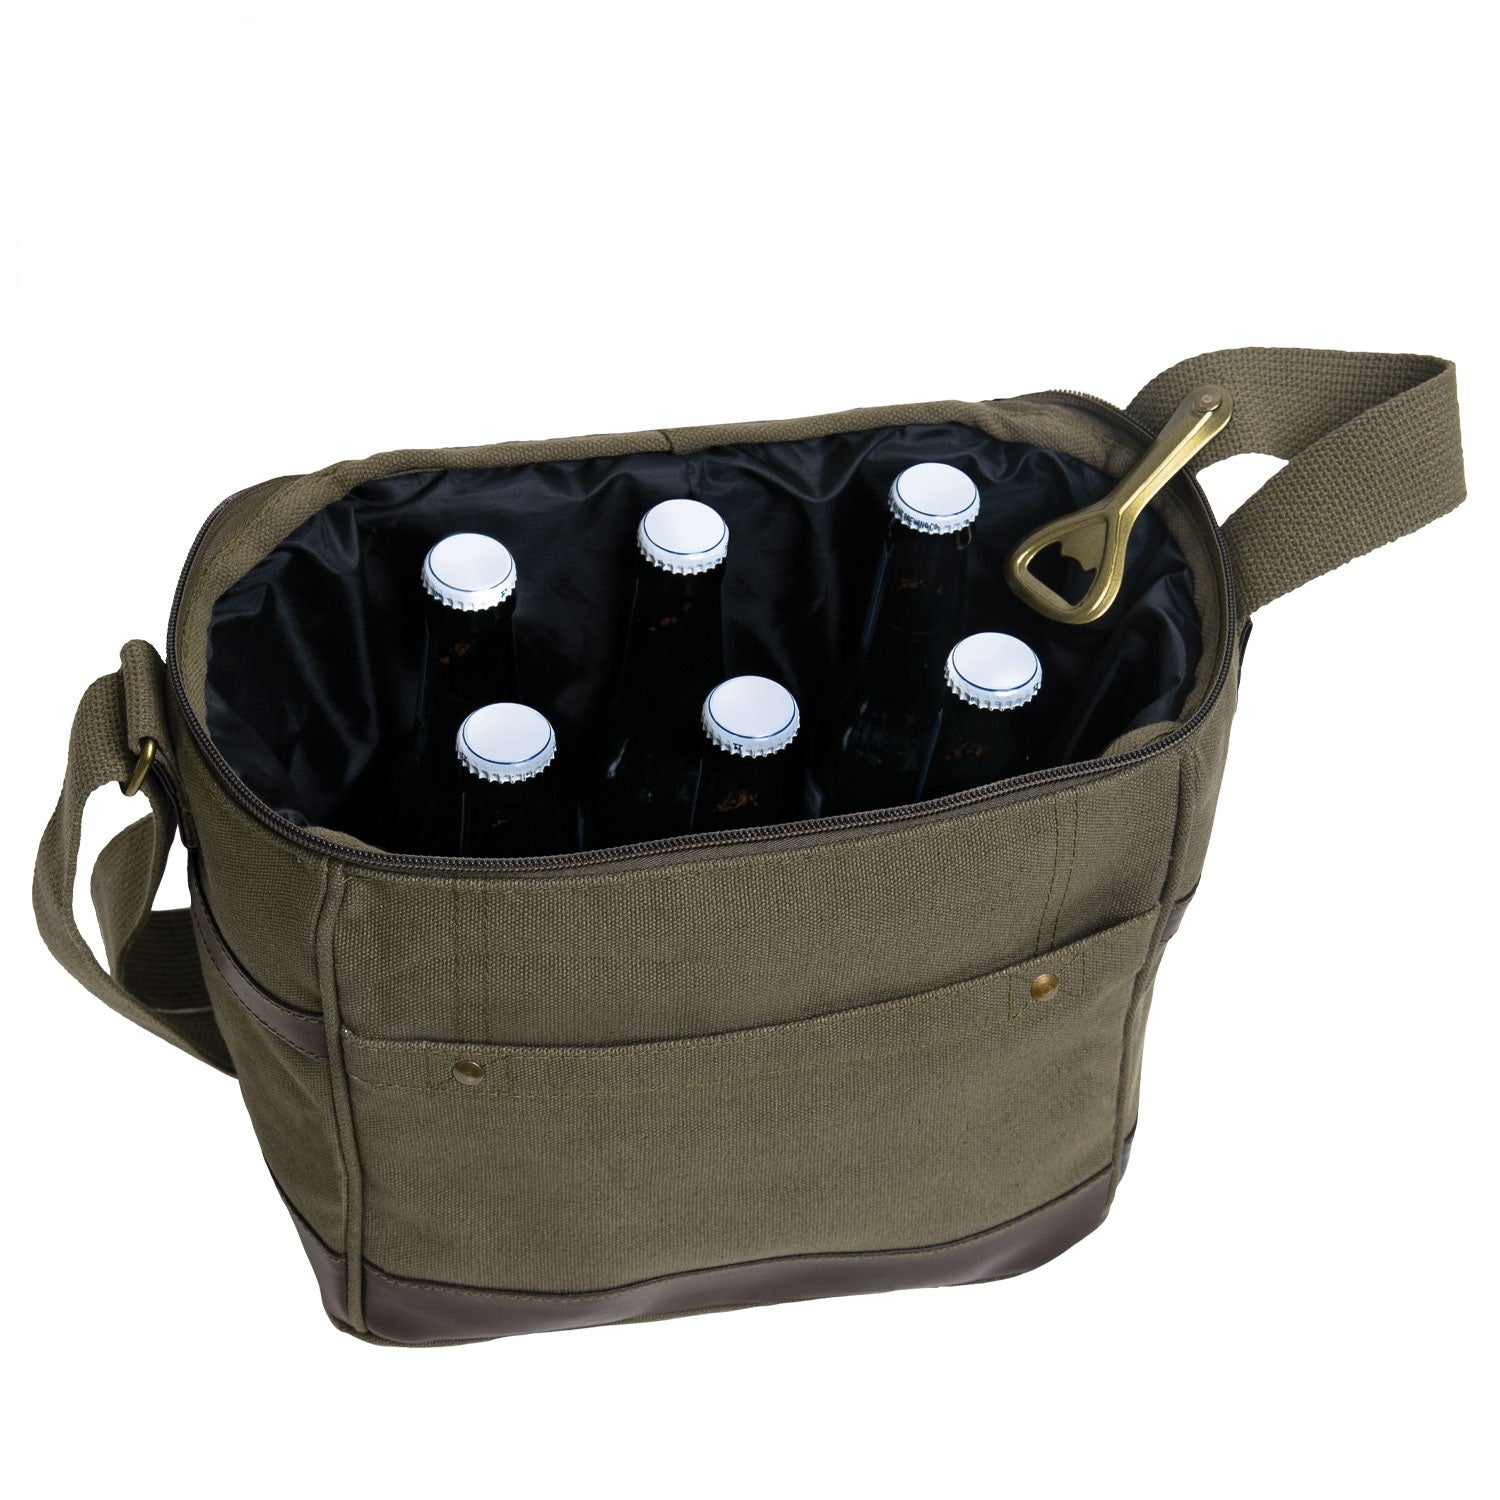 Rothco Canvas Insulated Cooler Bag Olive Drab